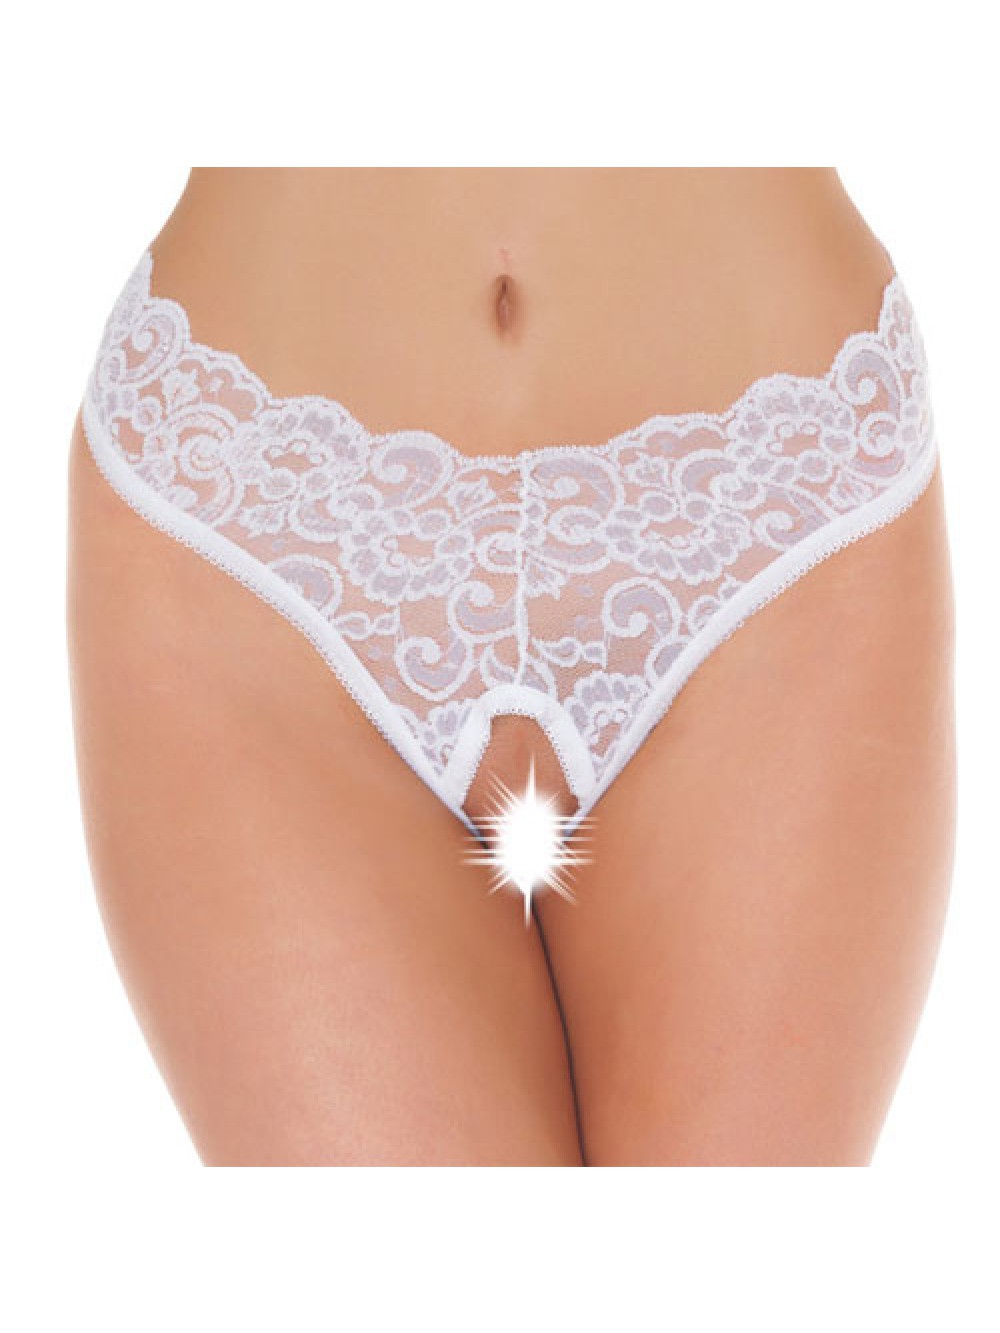 White Lace Open Crotch G-String